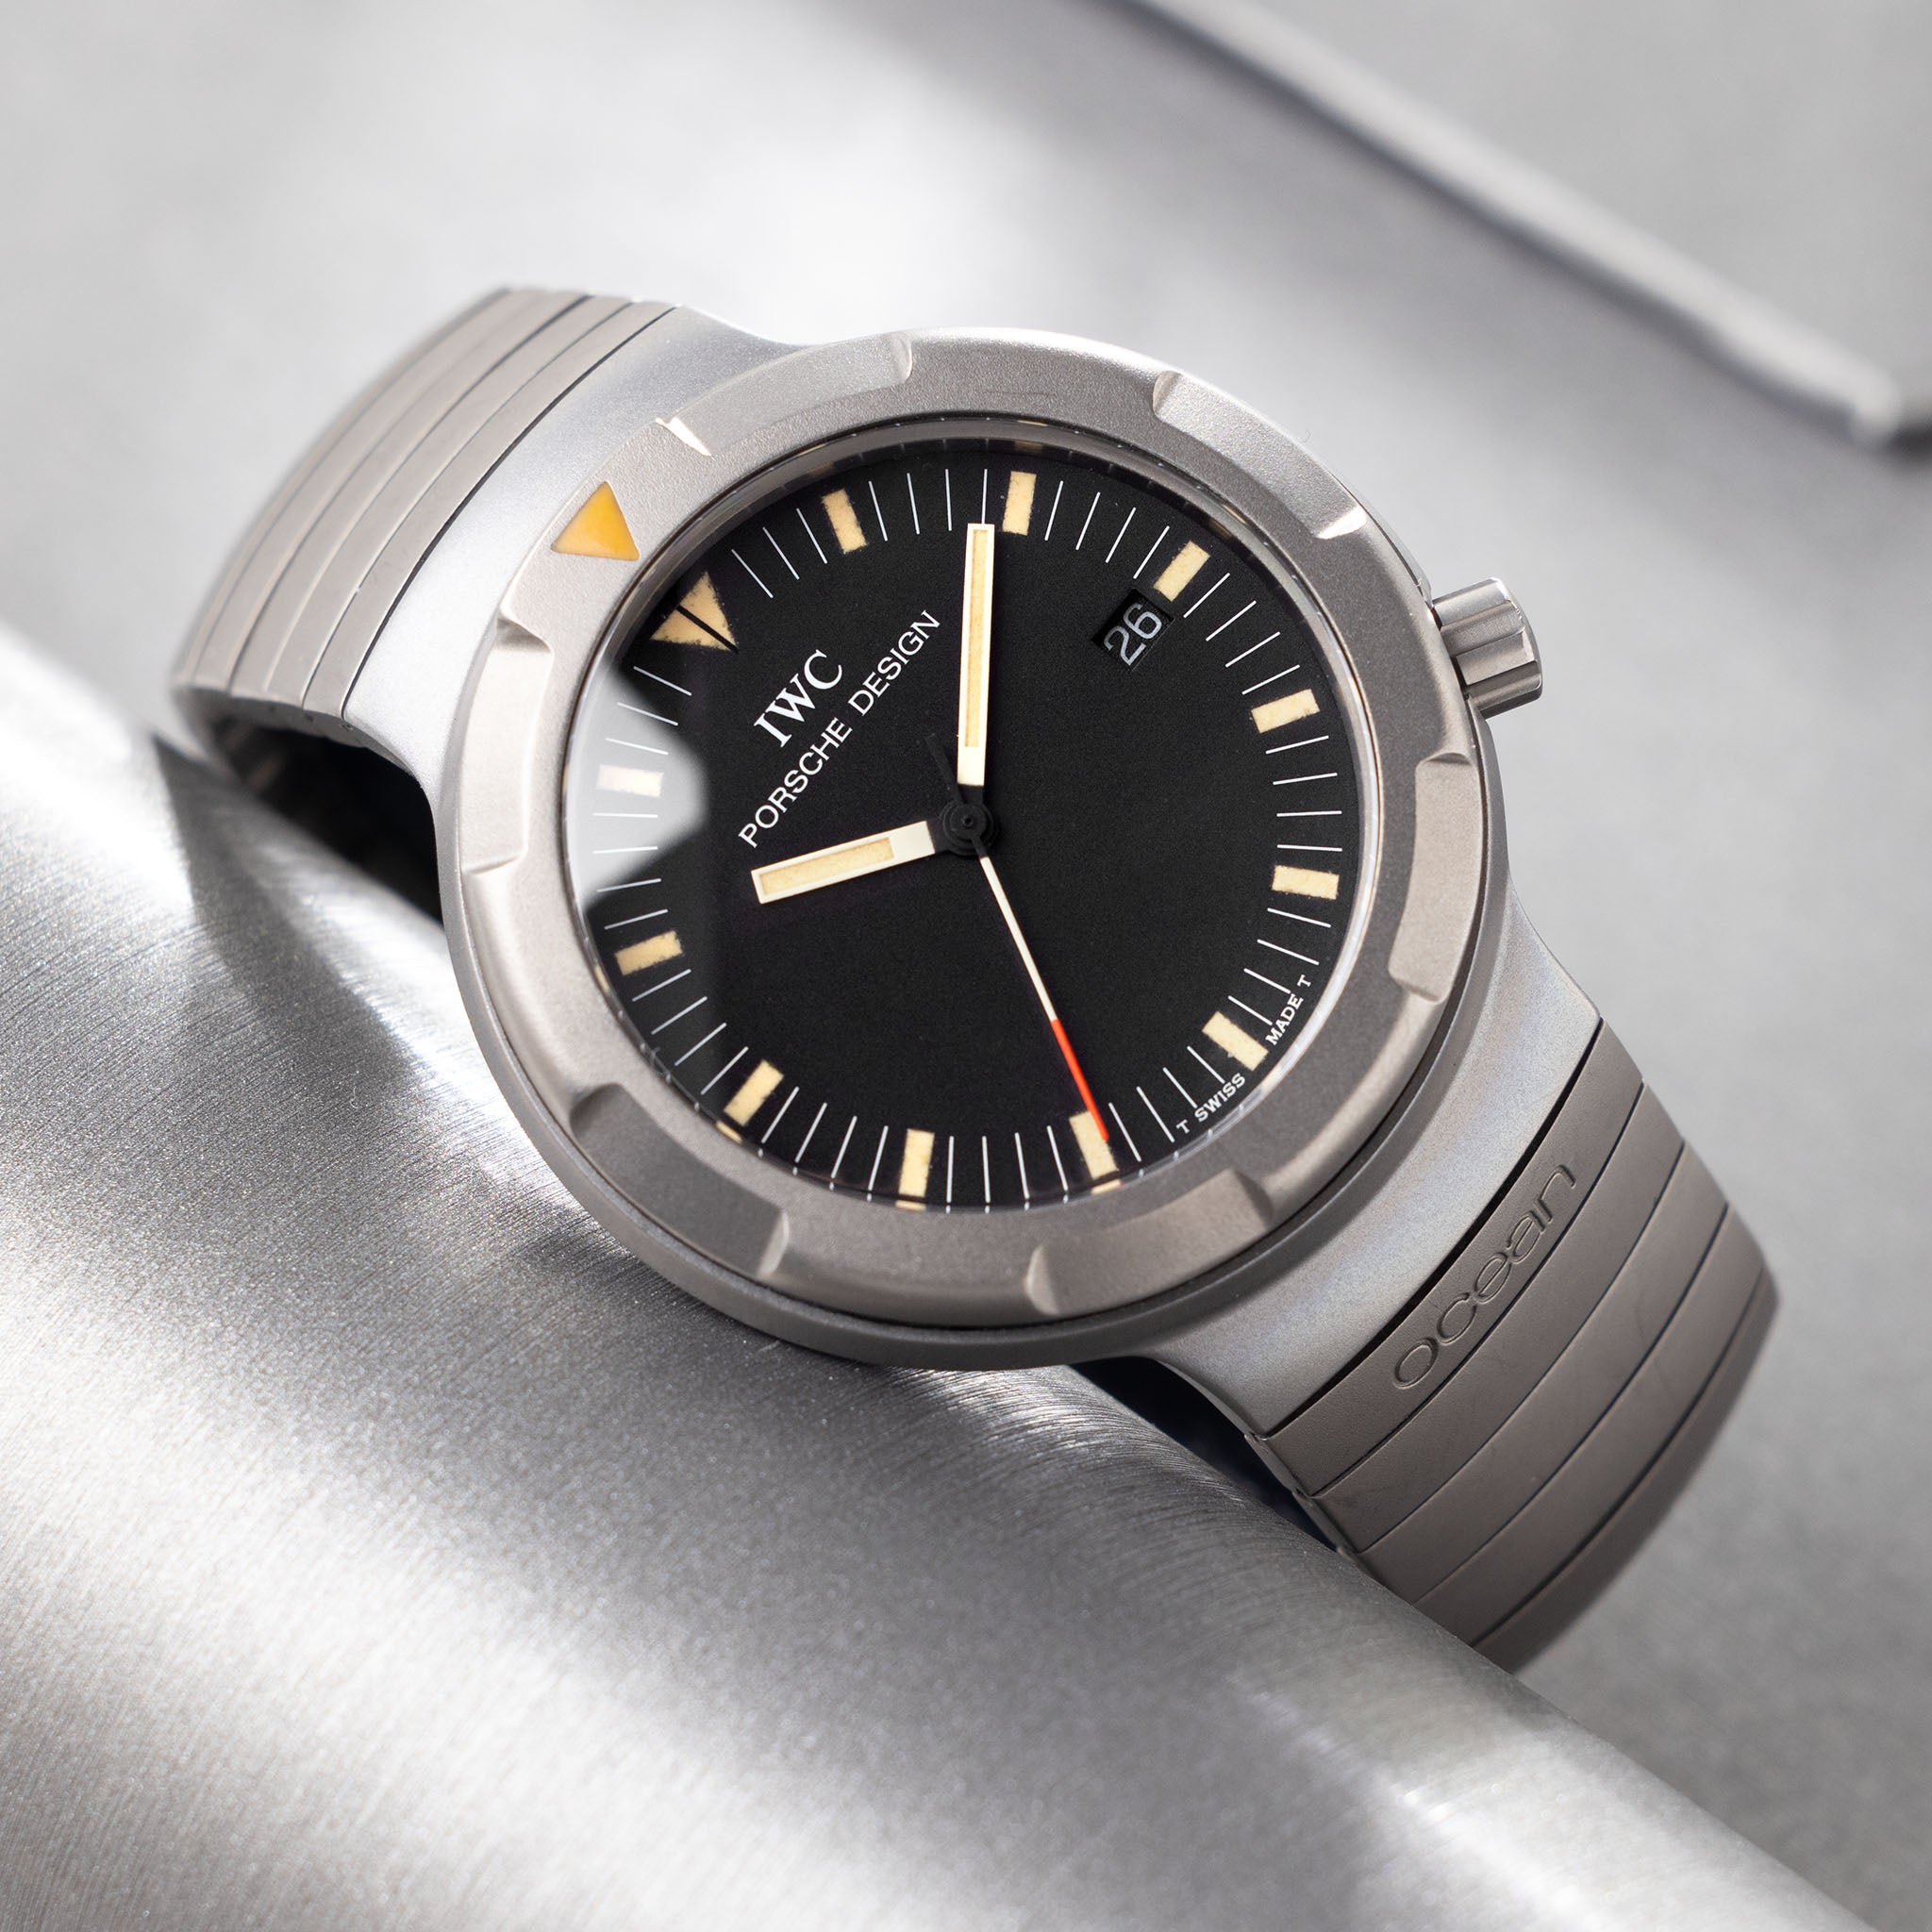 Porsche Design by IWC Ocean 2000 ref. 3524 Box and Papers